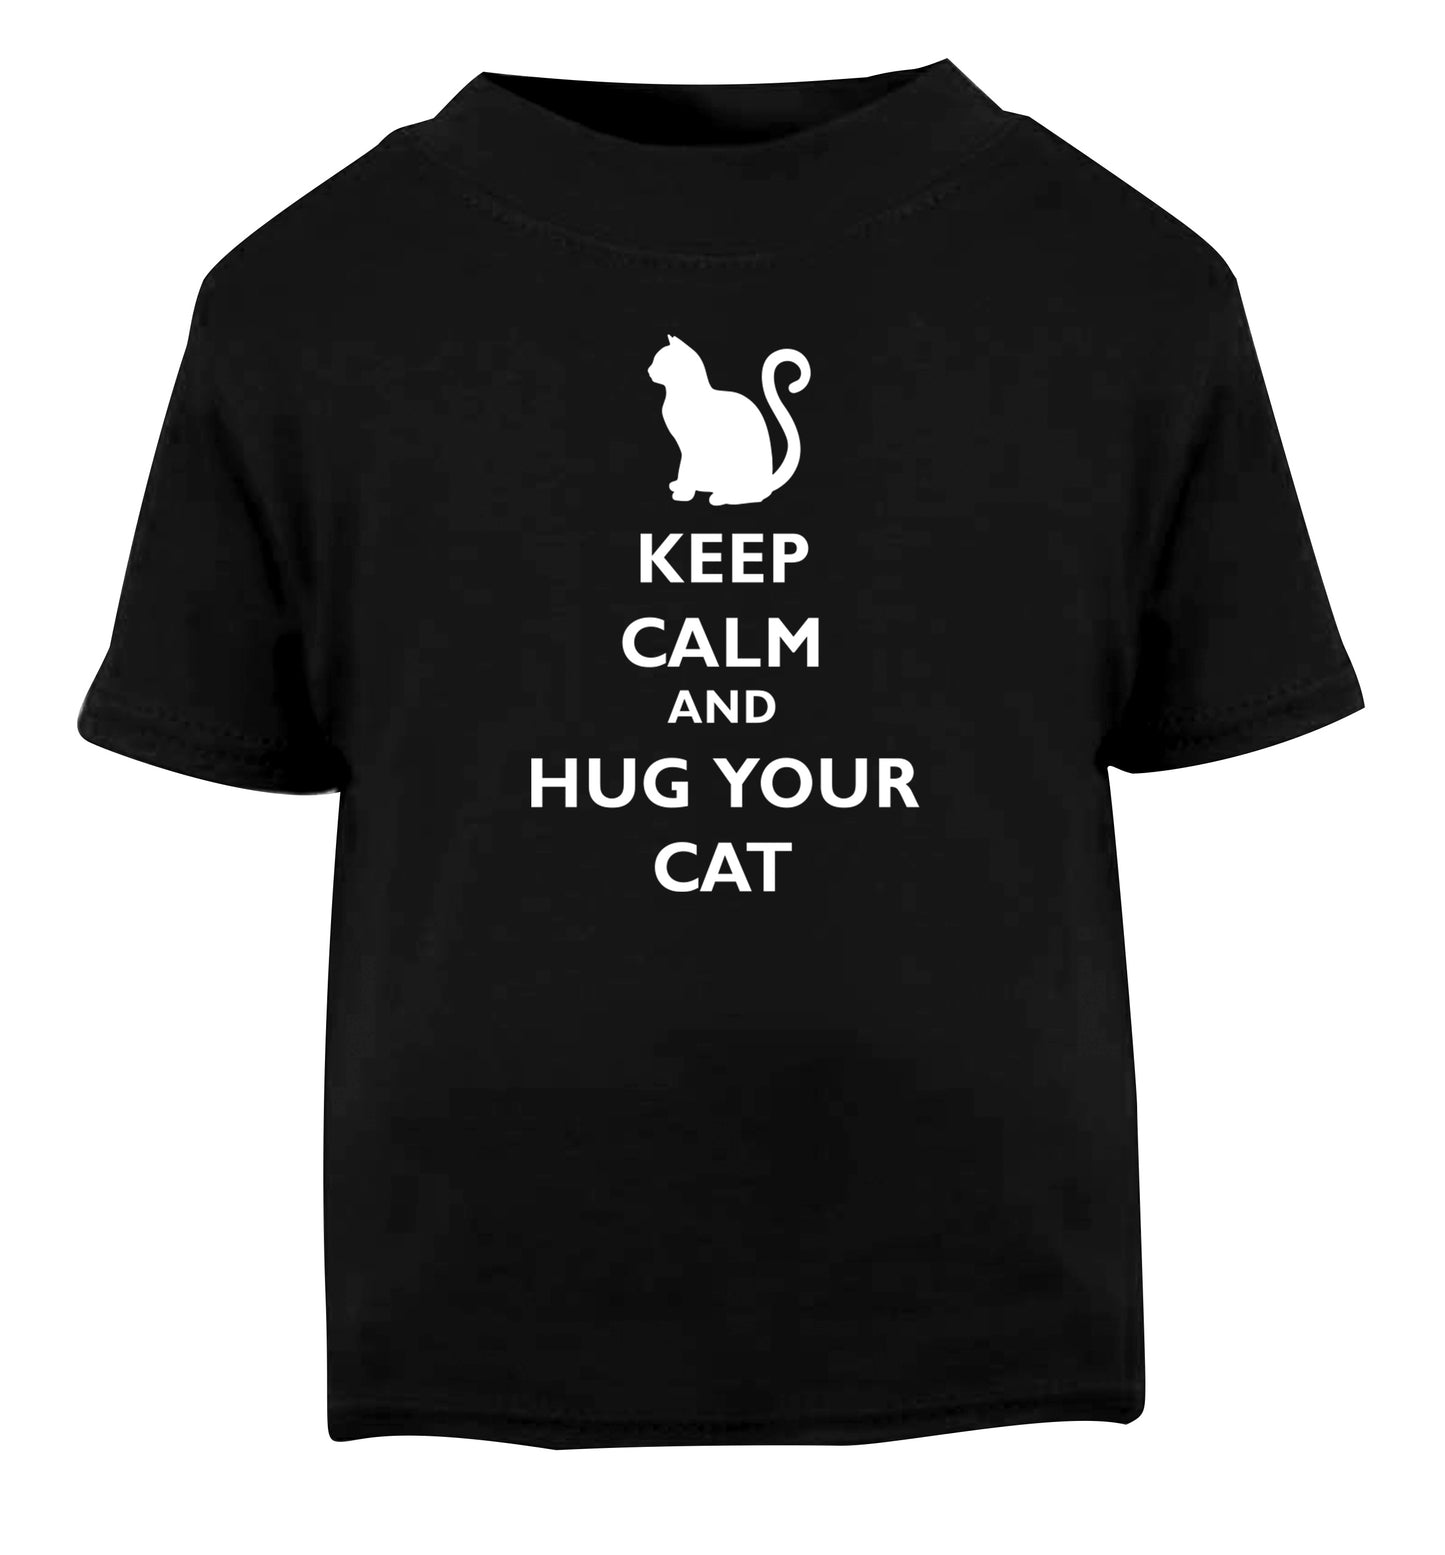 Keep calm and hug your cat Black Baby Toddler Tshirt 2 years